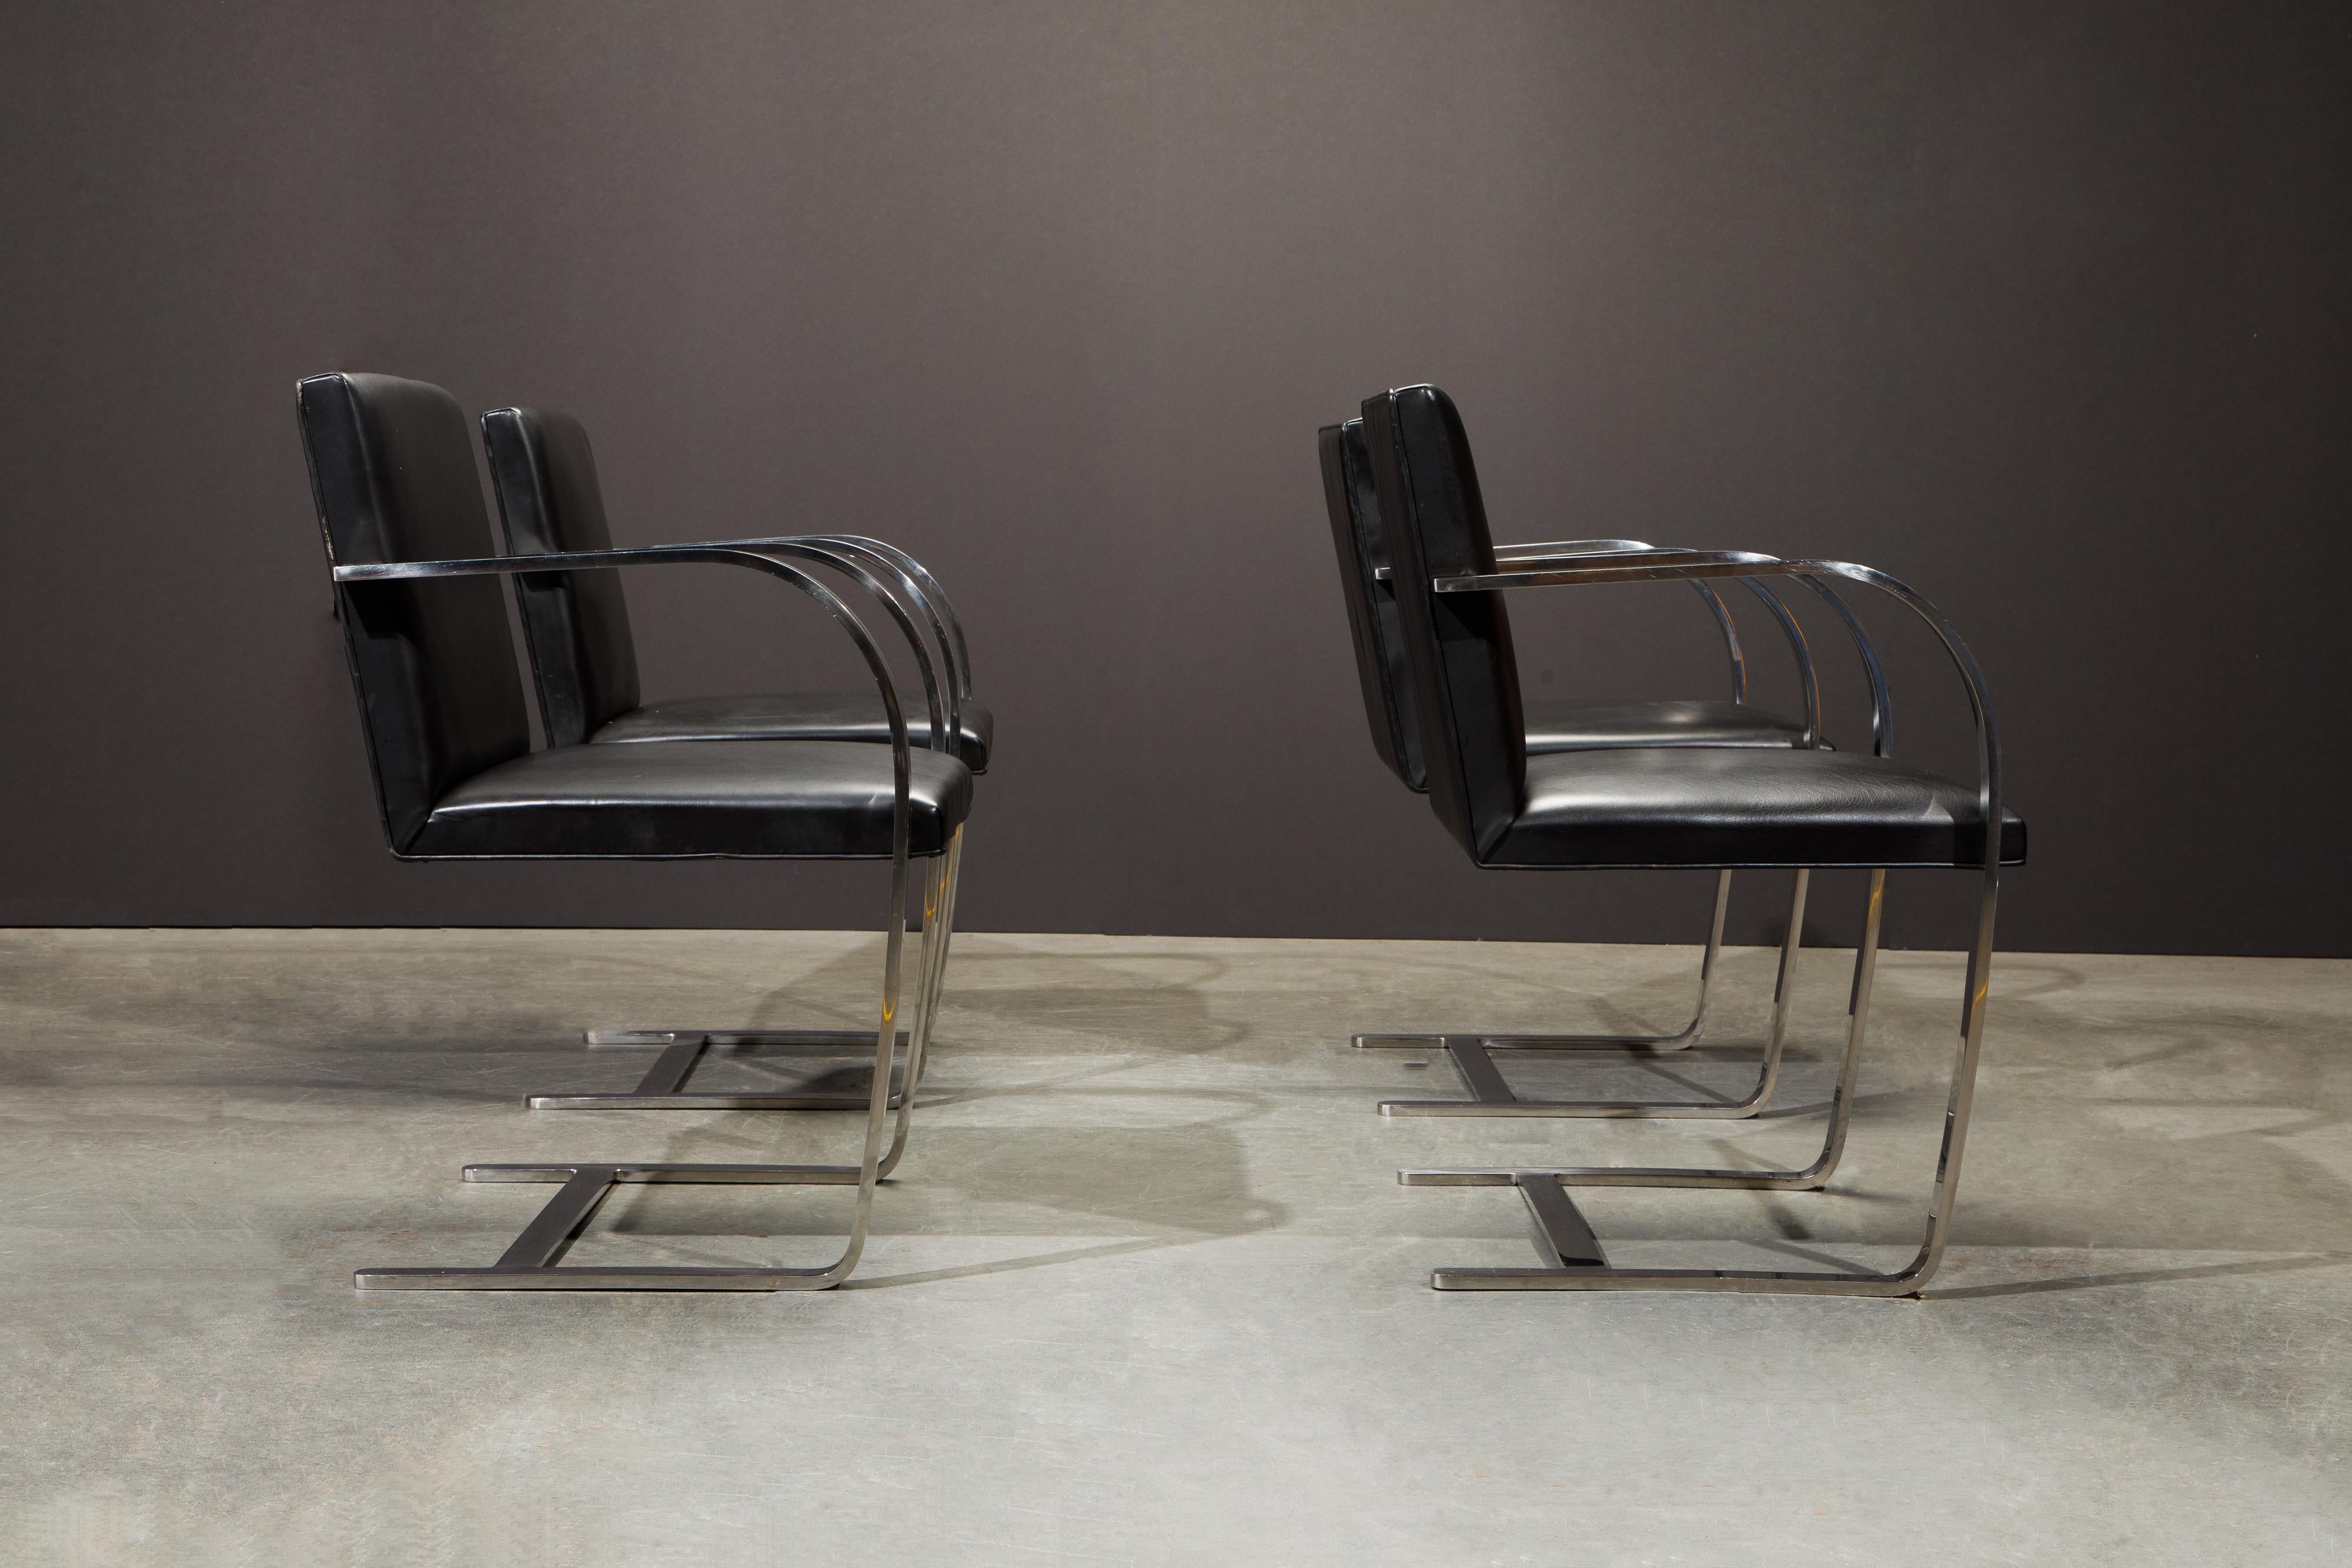 Stainless Steel Knoll International Leather 'Brno' Chairs by Mies van der Rohe, 1987, Signed